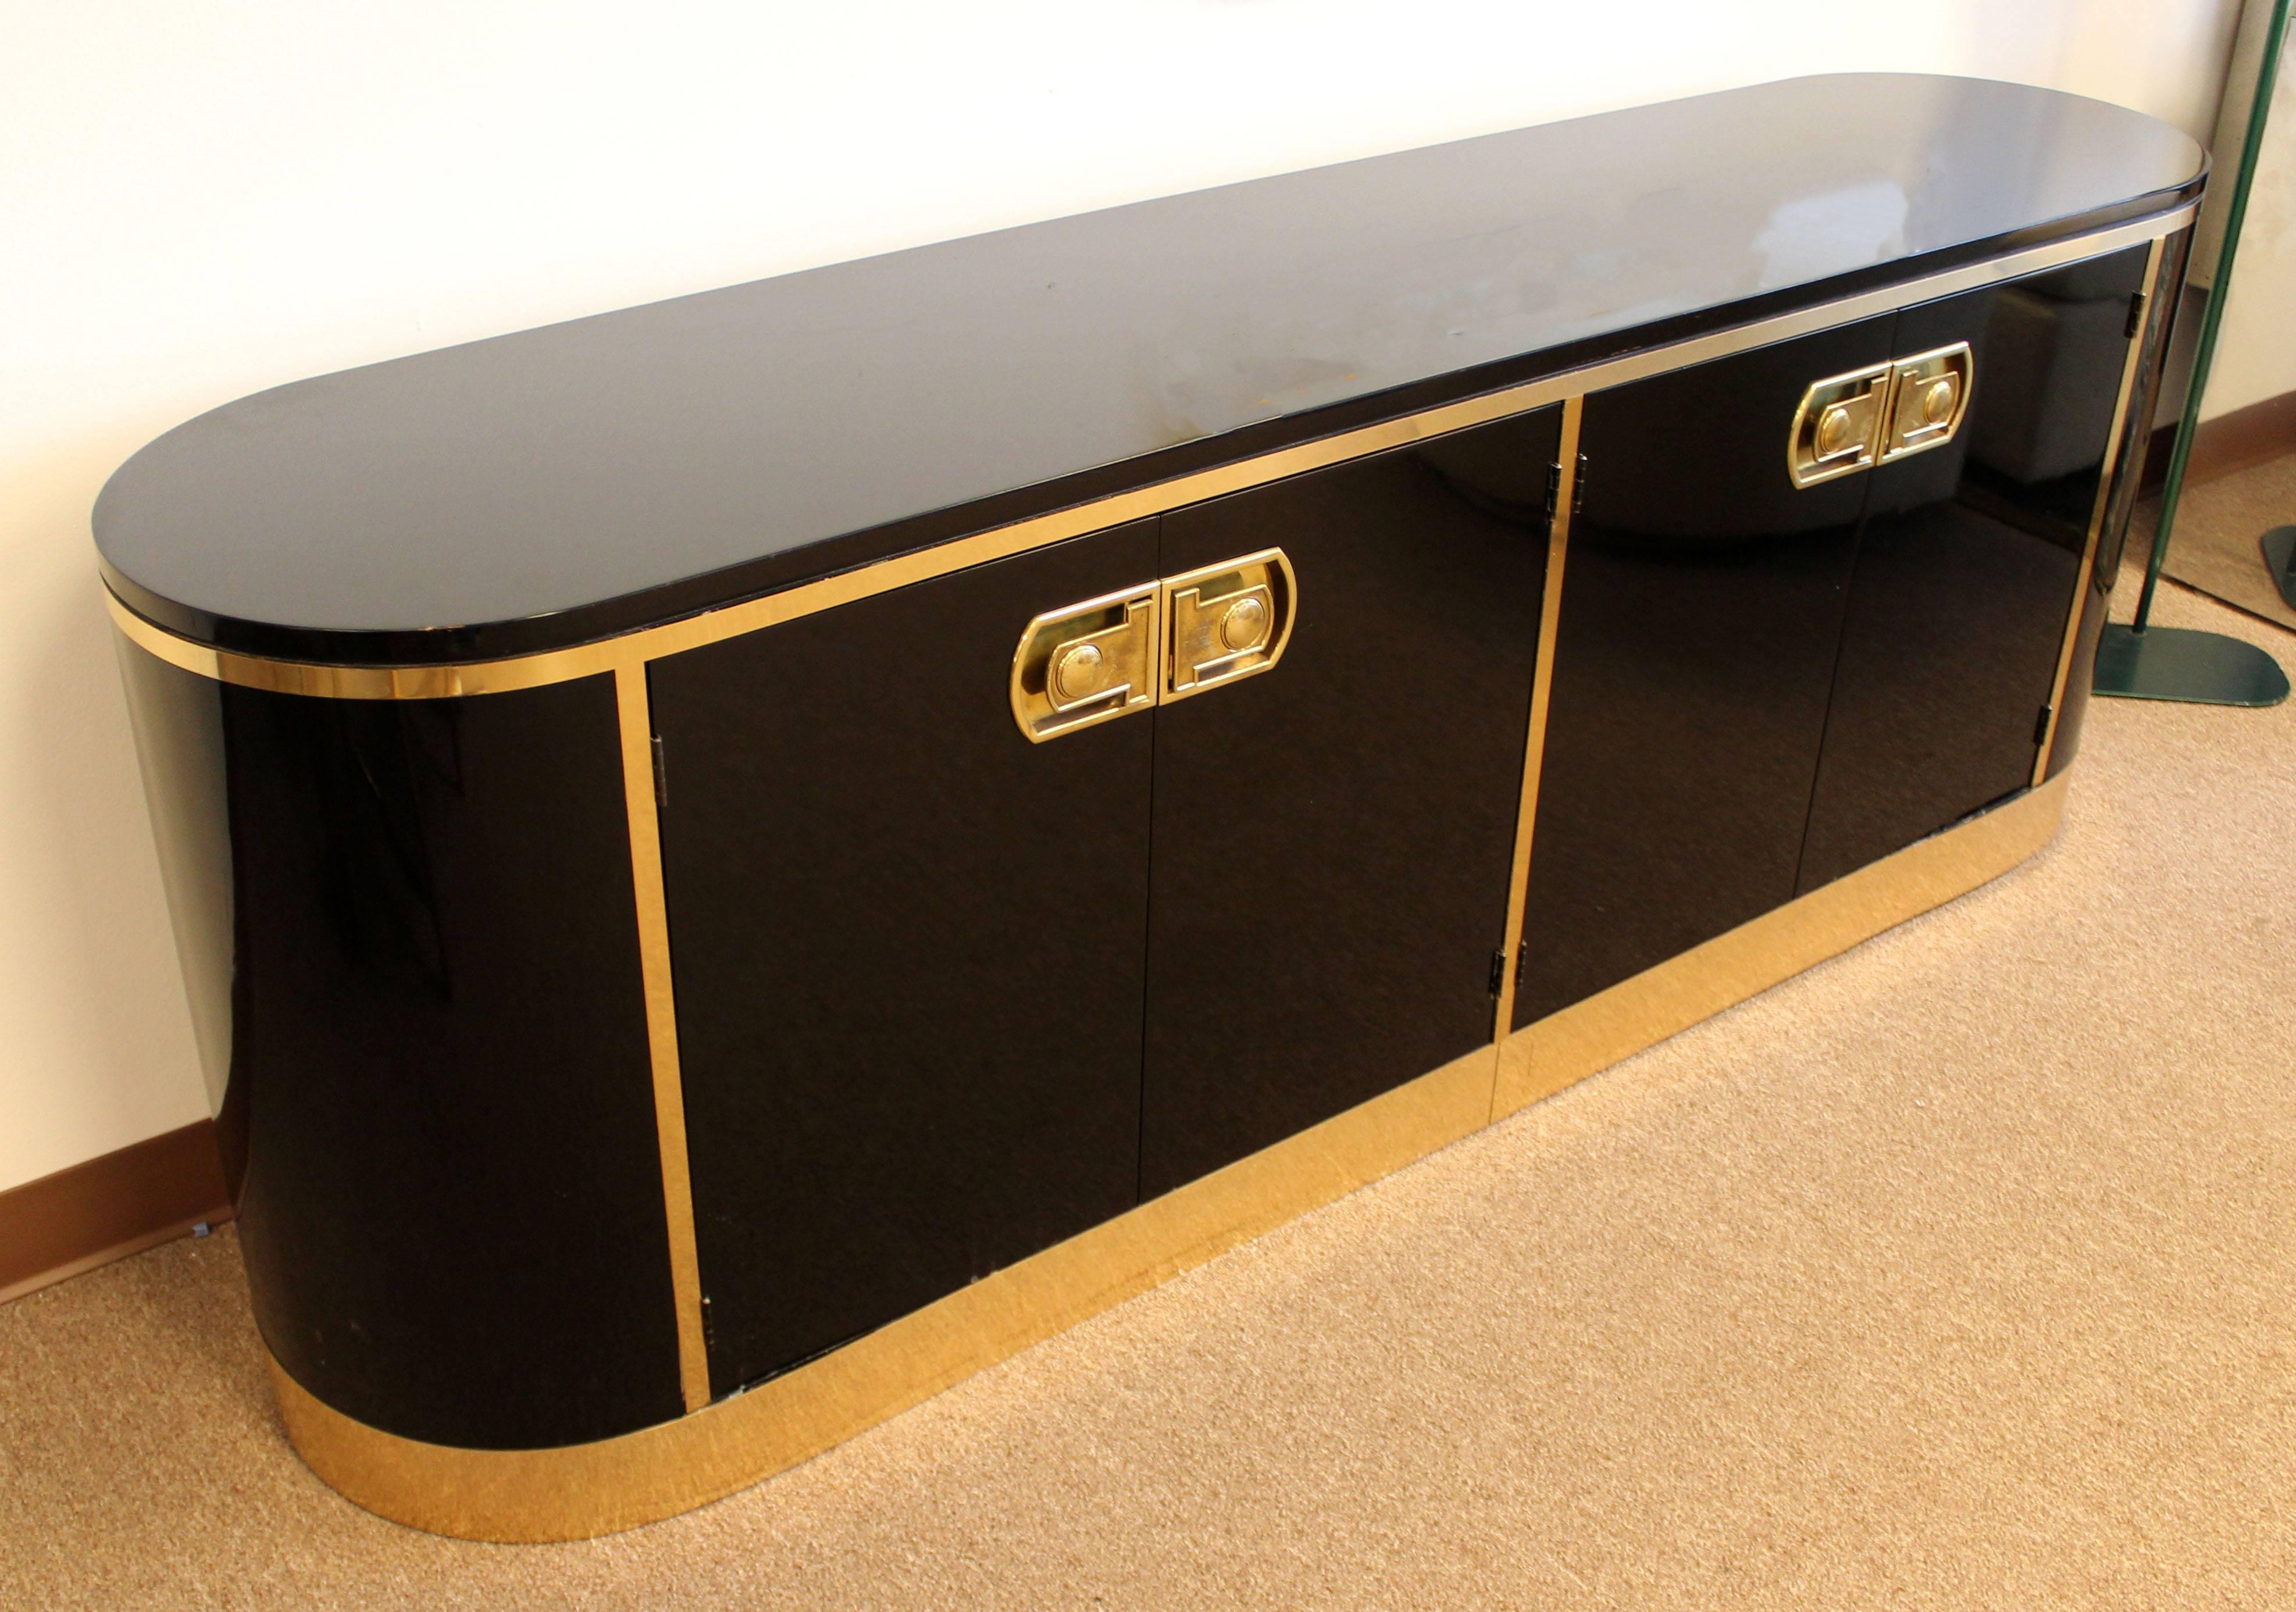 For your consideration is a magnificent, black lacquer credenza, with brass pulls and trims, from Mastercraft, circa the 1970s. In excellent condition. The dimensions are 80